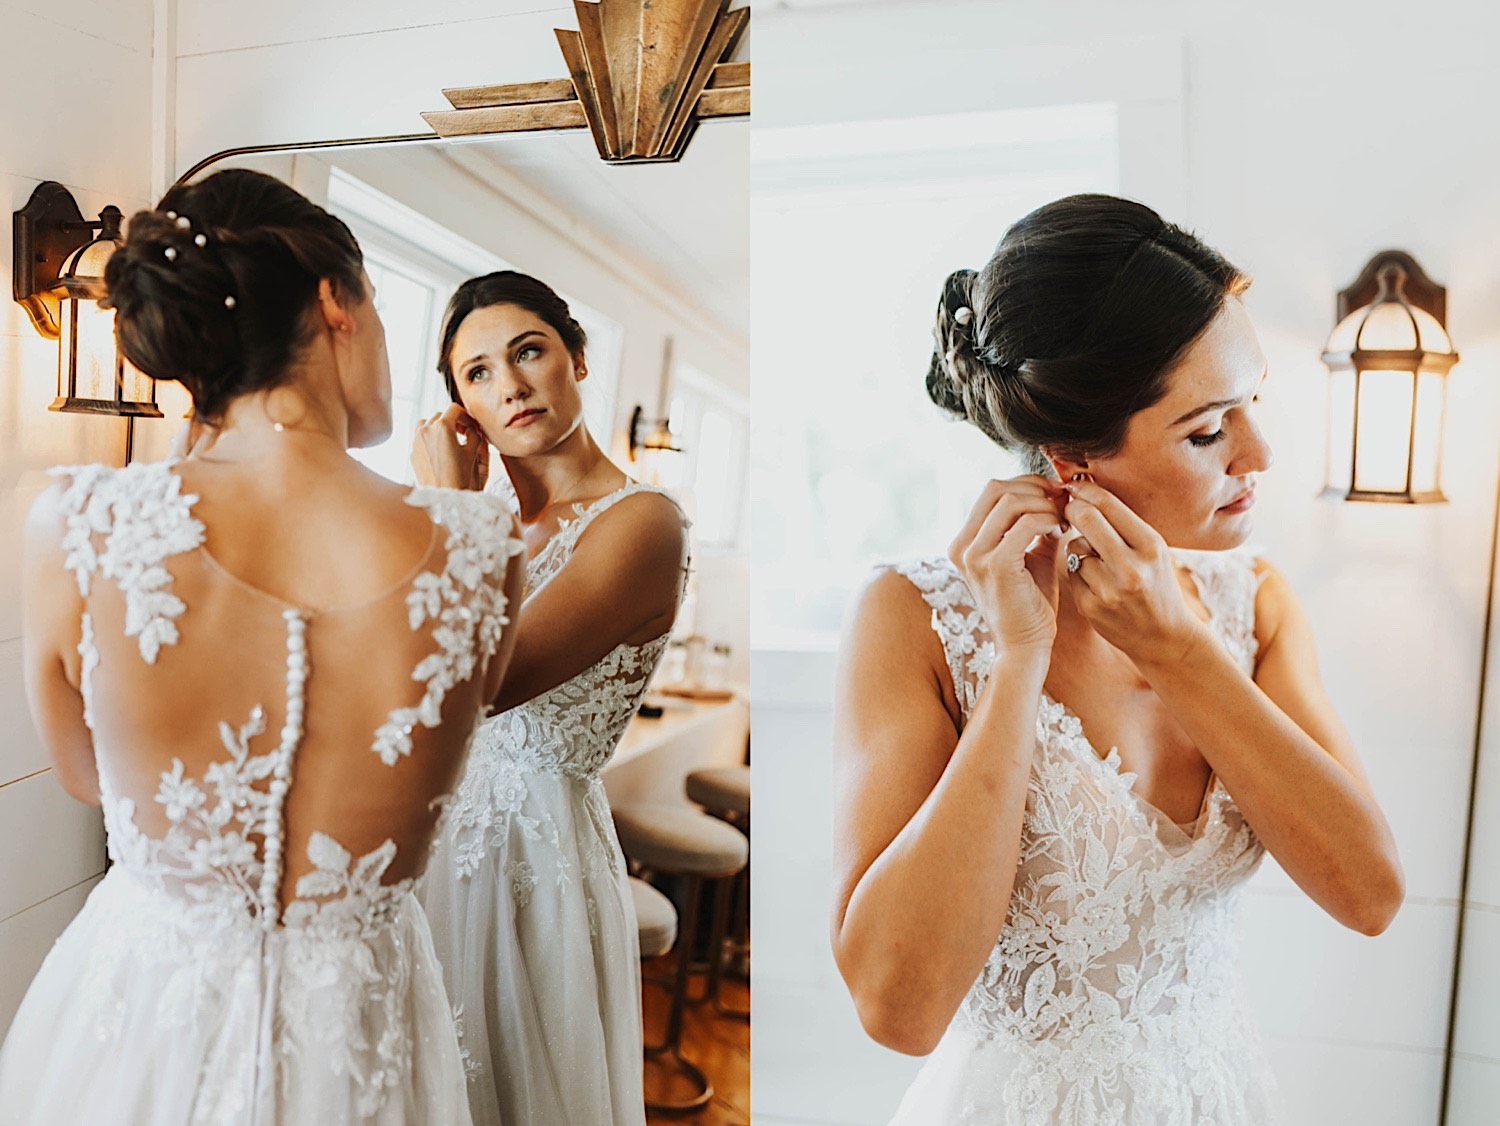 2 photos side by side, the left is of a bride in a mirror putting her earrings on, the right is of the bride putting her earrings on